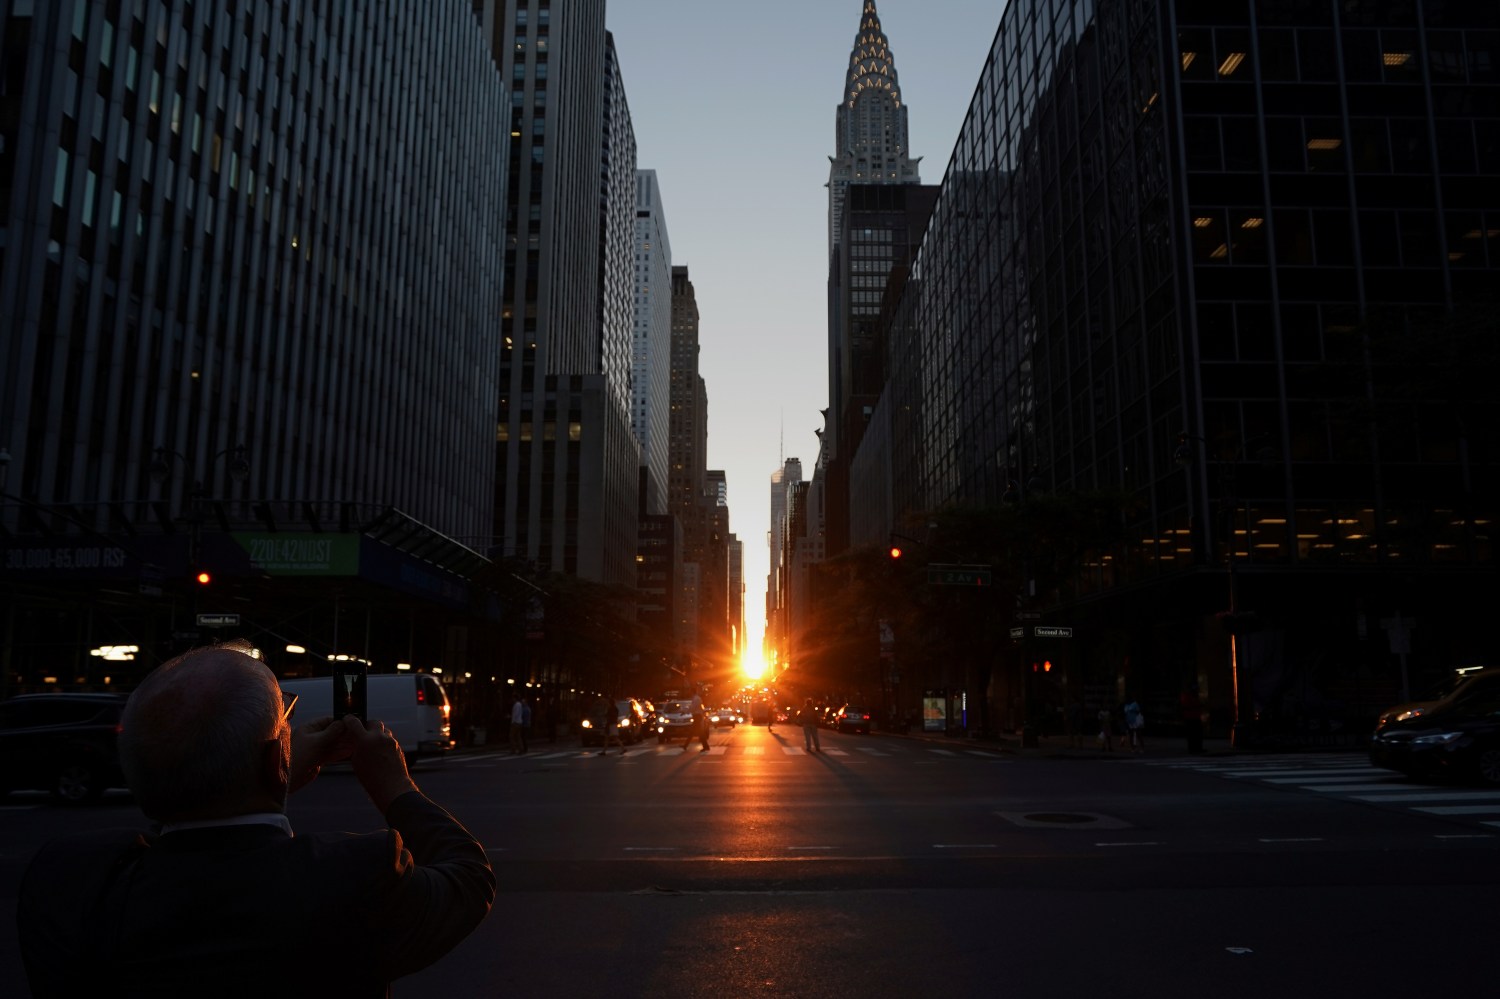 A man takes a photo as the sun sets while lined up with 42nd Ave a few days after the Manhattanhenge phenomenon.